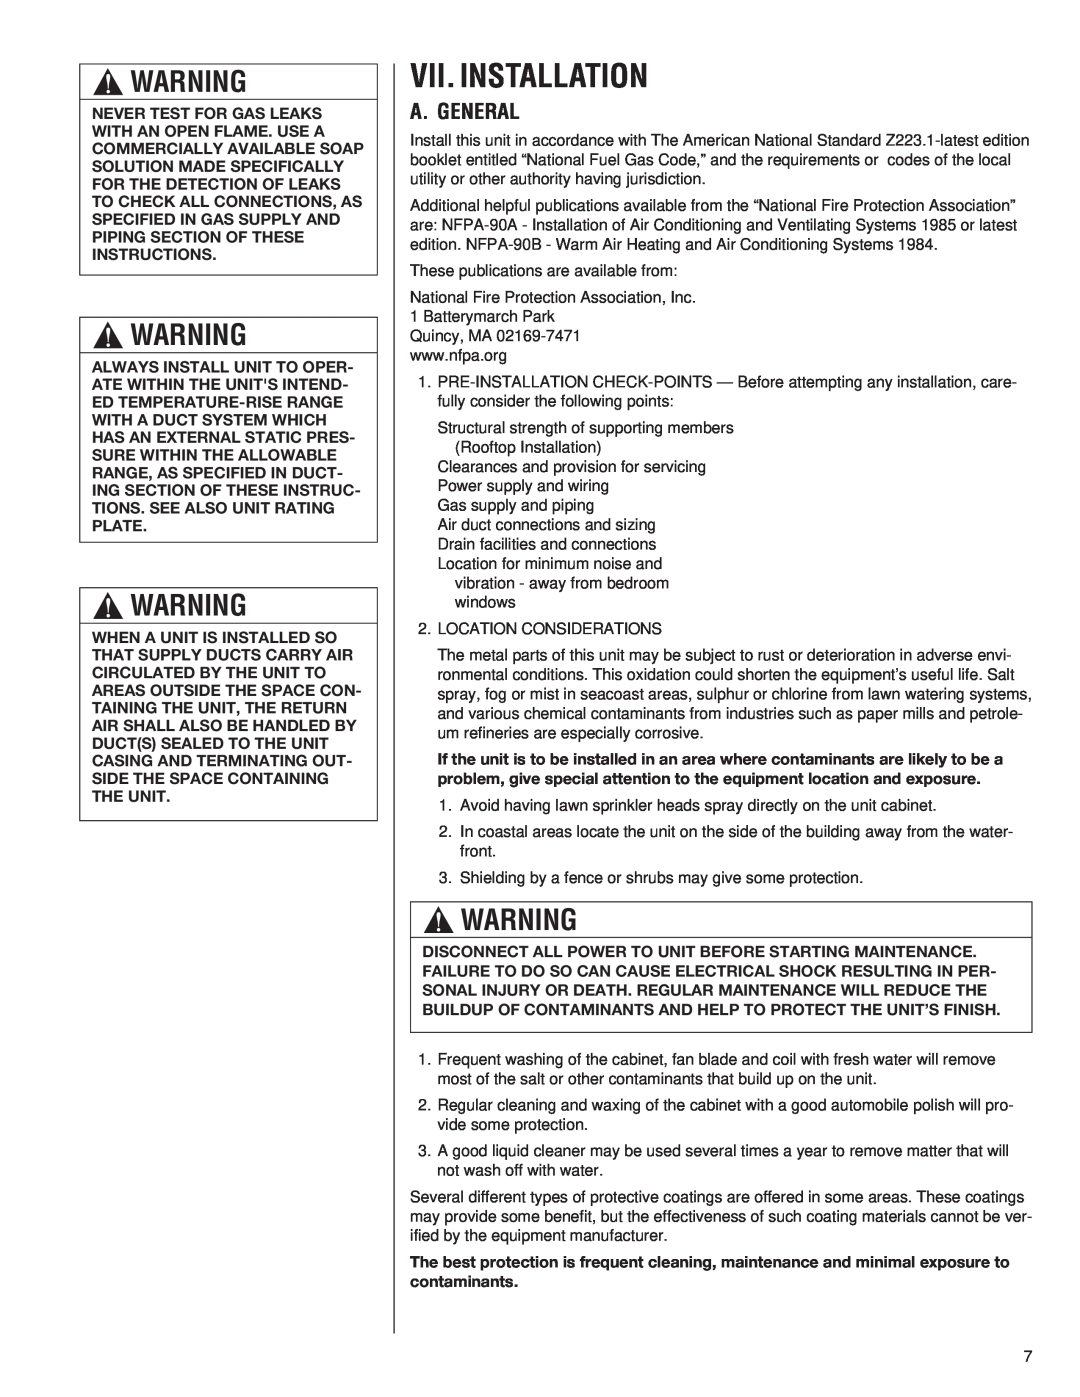 Heat Controller A-13 installation instructions Vii. Installation, A. General 